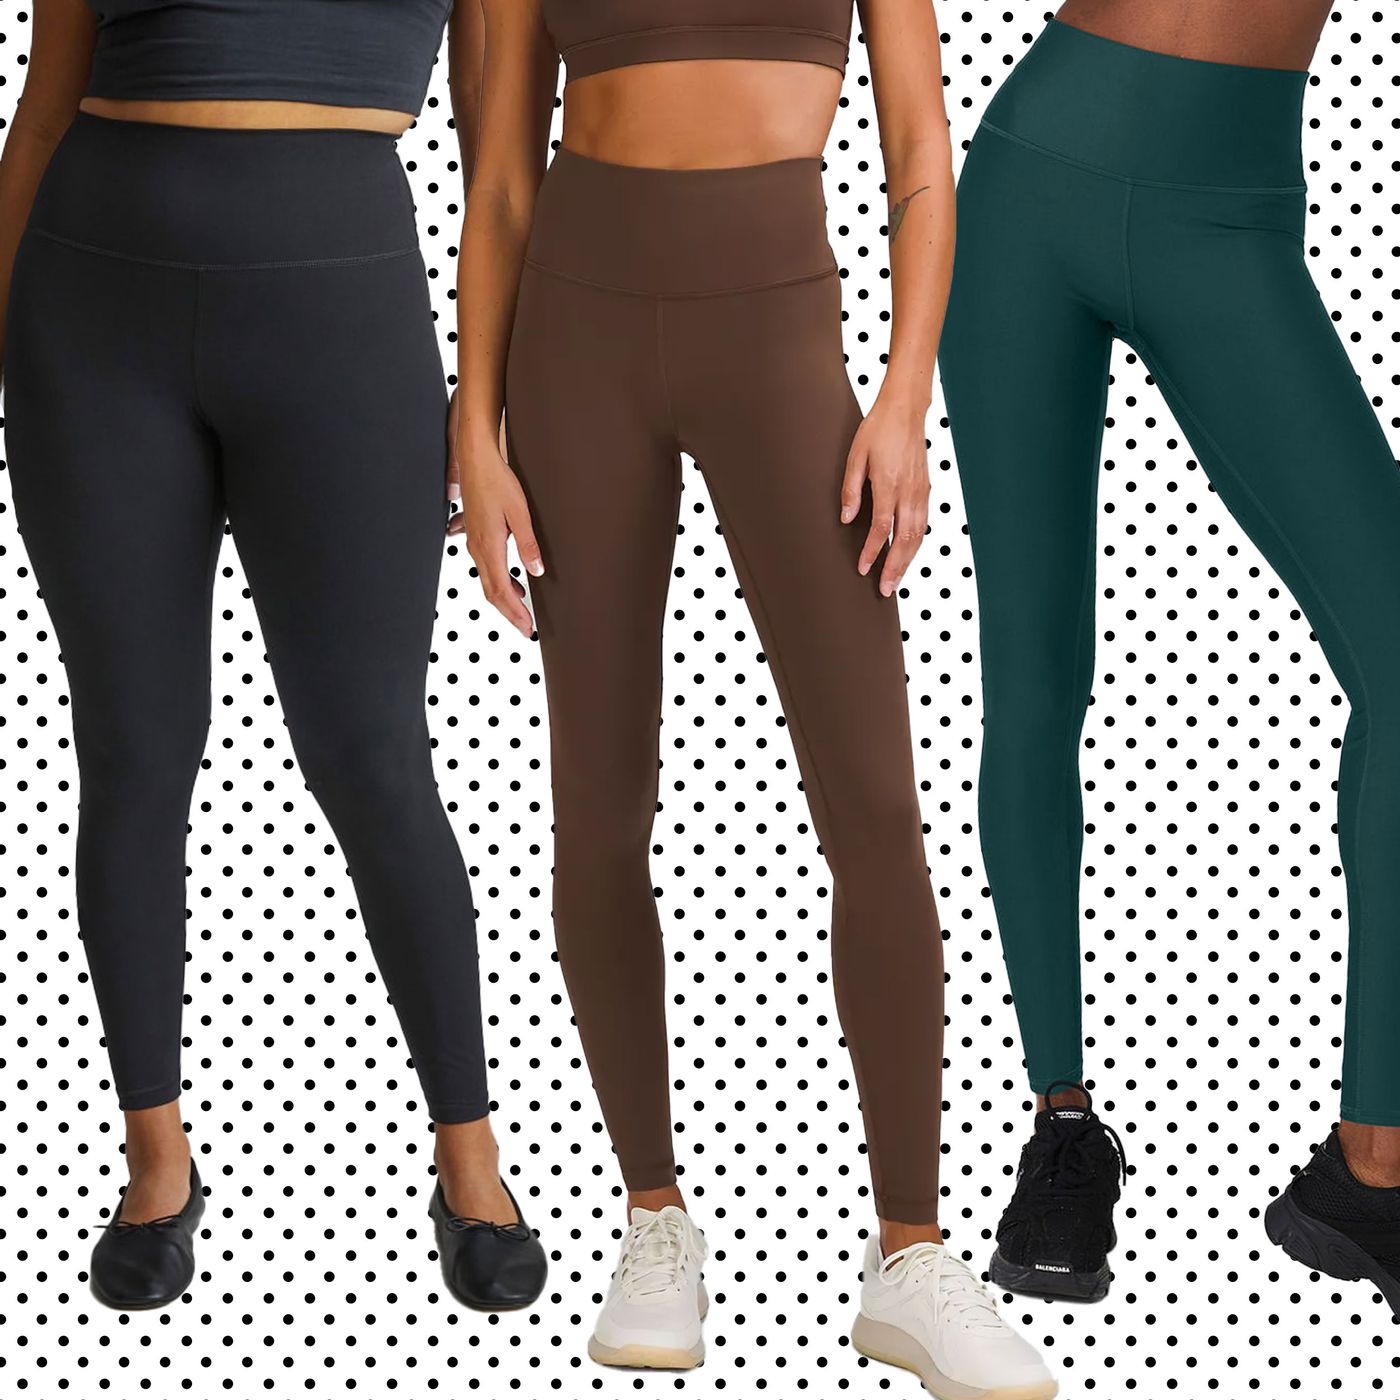 Shop for women's activewear tops, leggings and other activewear – Steezy-cheohanoi.vn